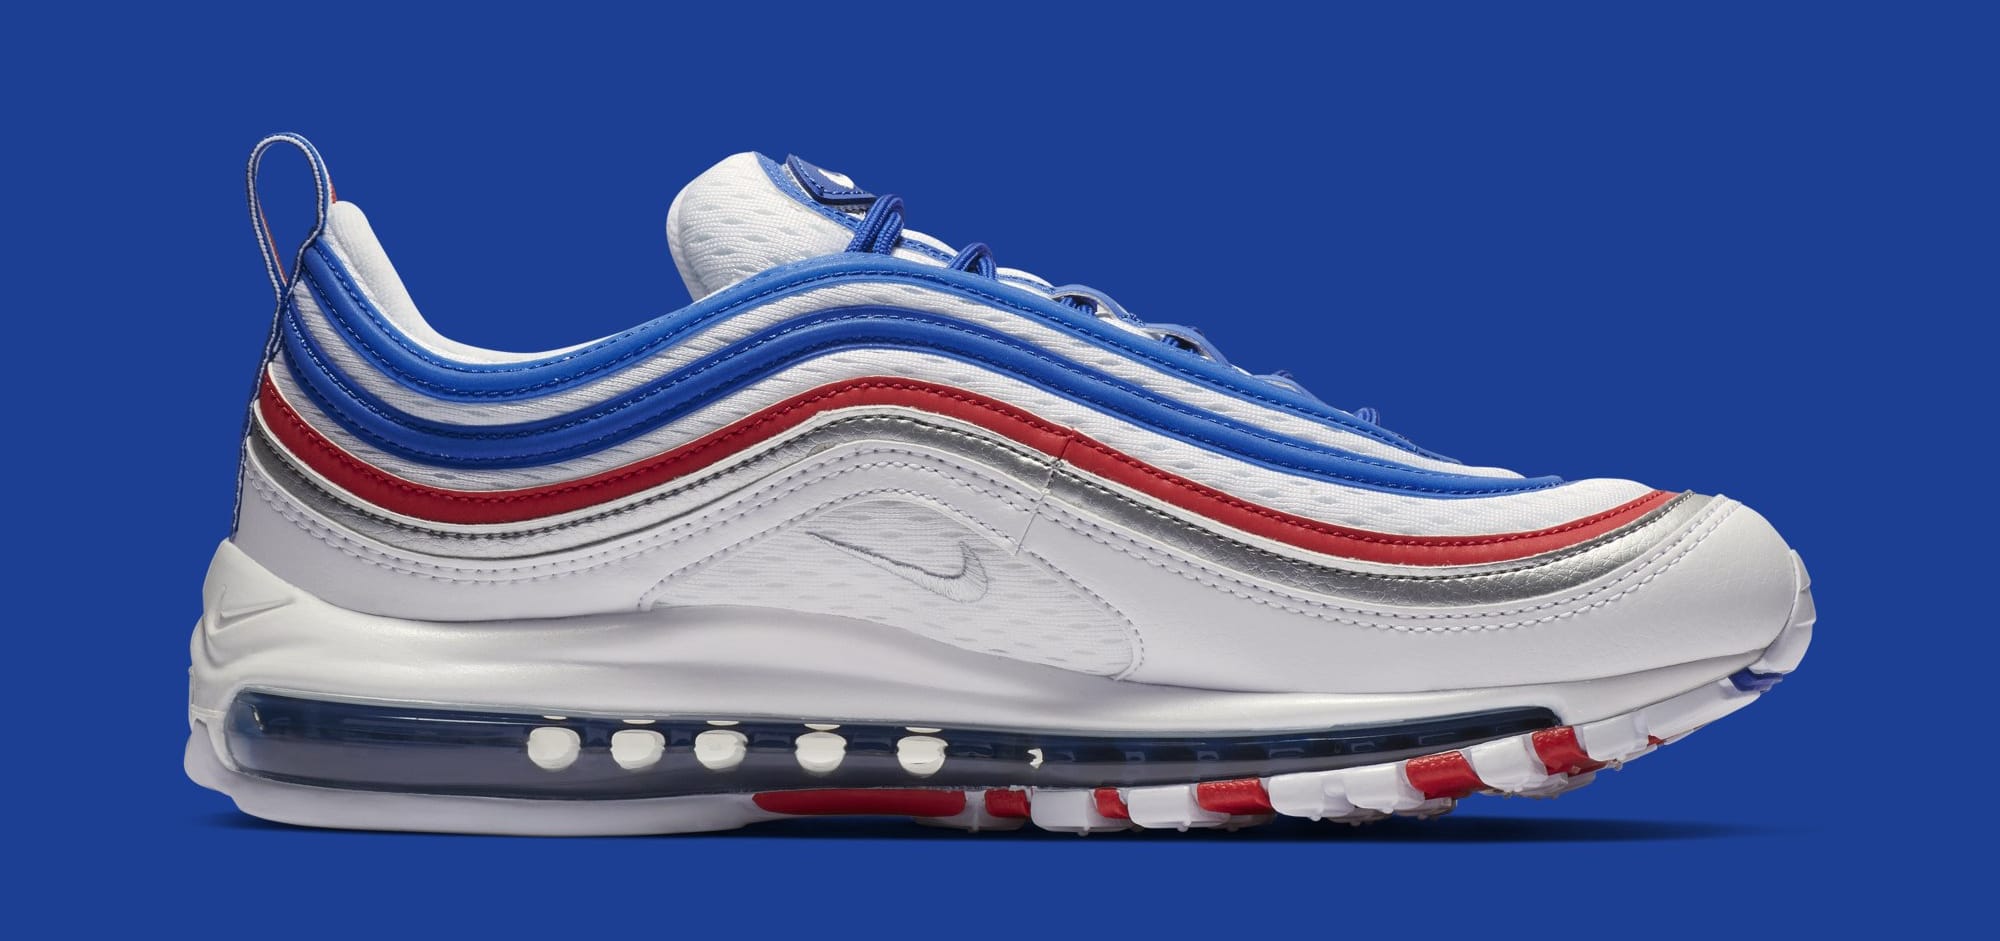 Get Patriotic With The Nike Air Max 97 All-Star Jersey •